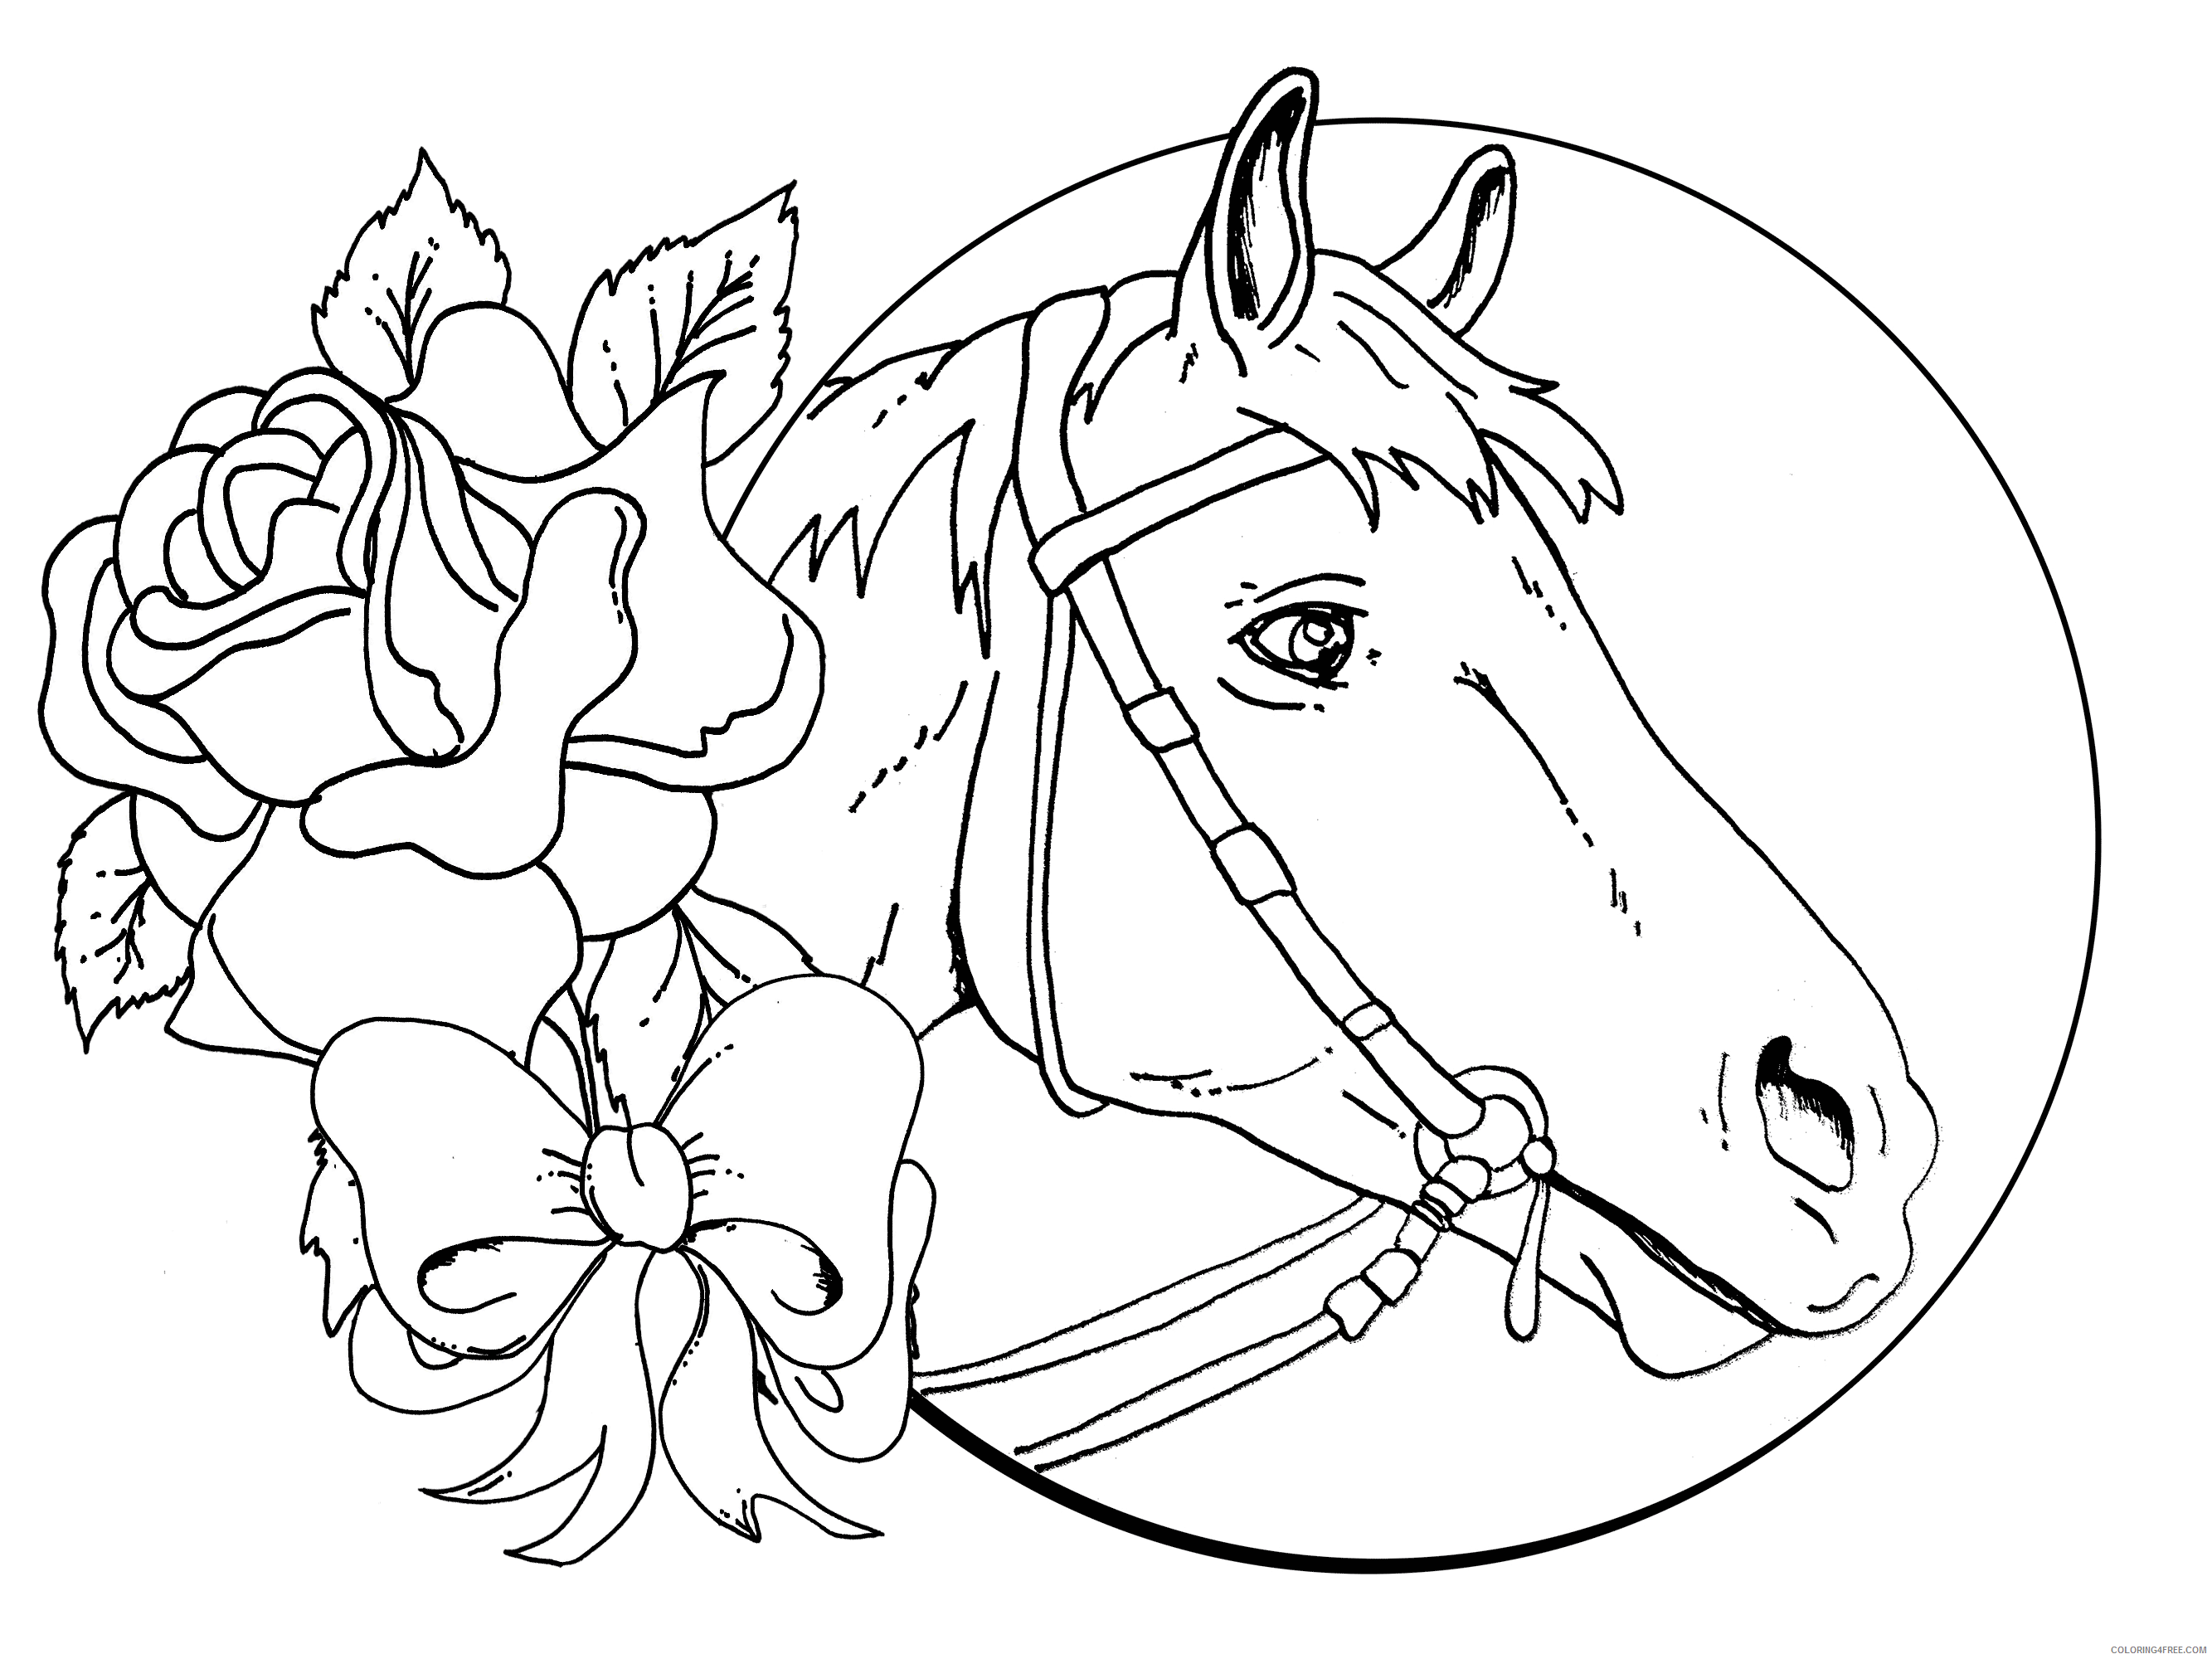 Animal Coloring Pages for Teens Printable Sheets for Girls Dr 2021 a 0354 Coloring4free